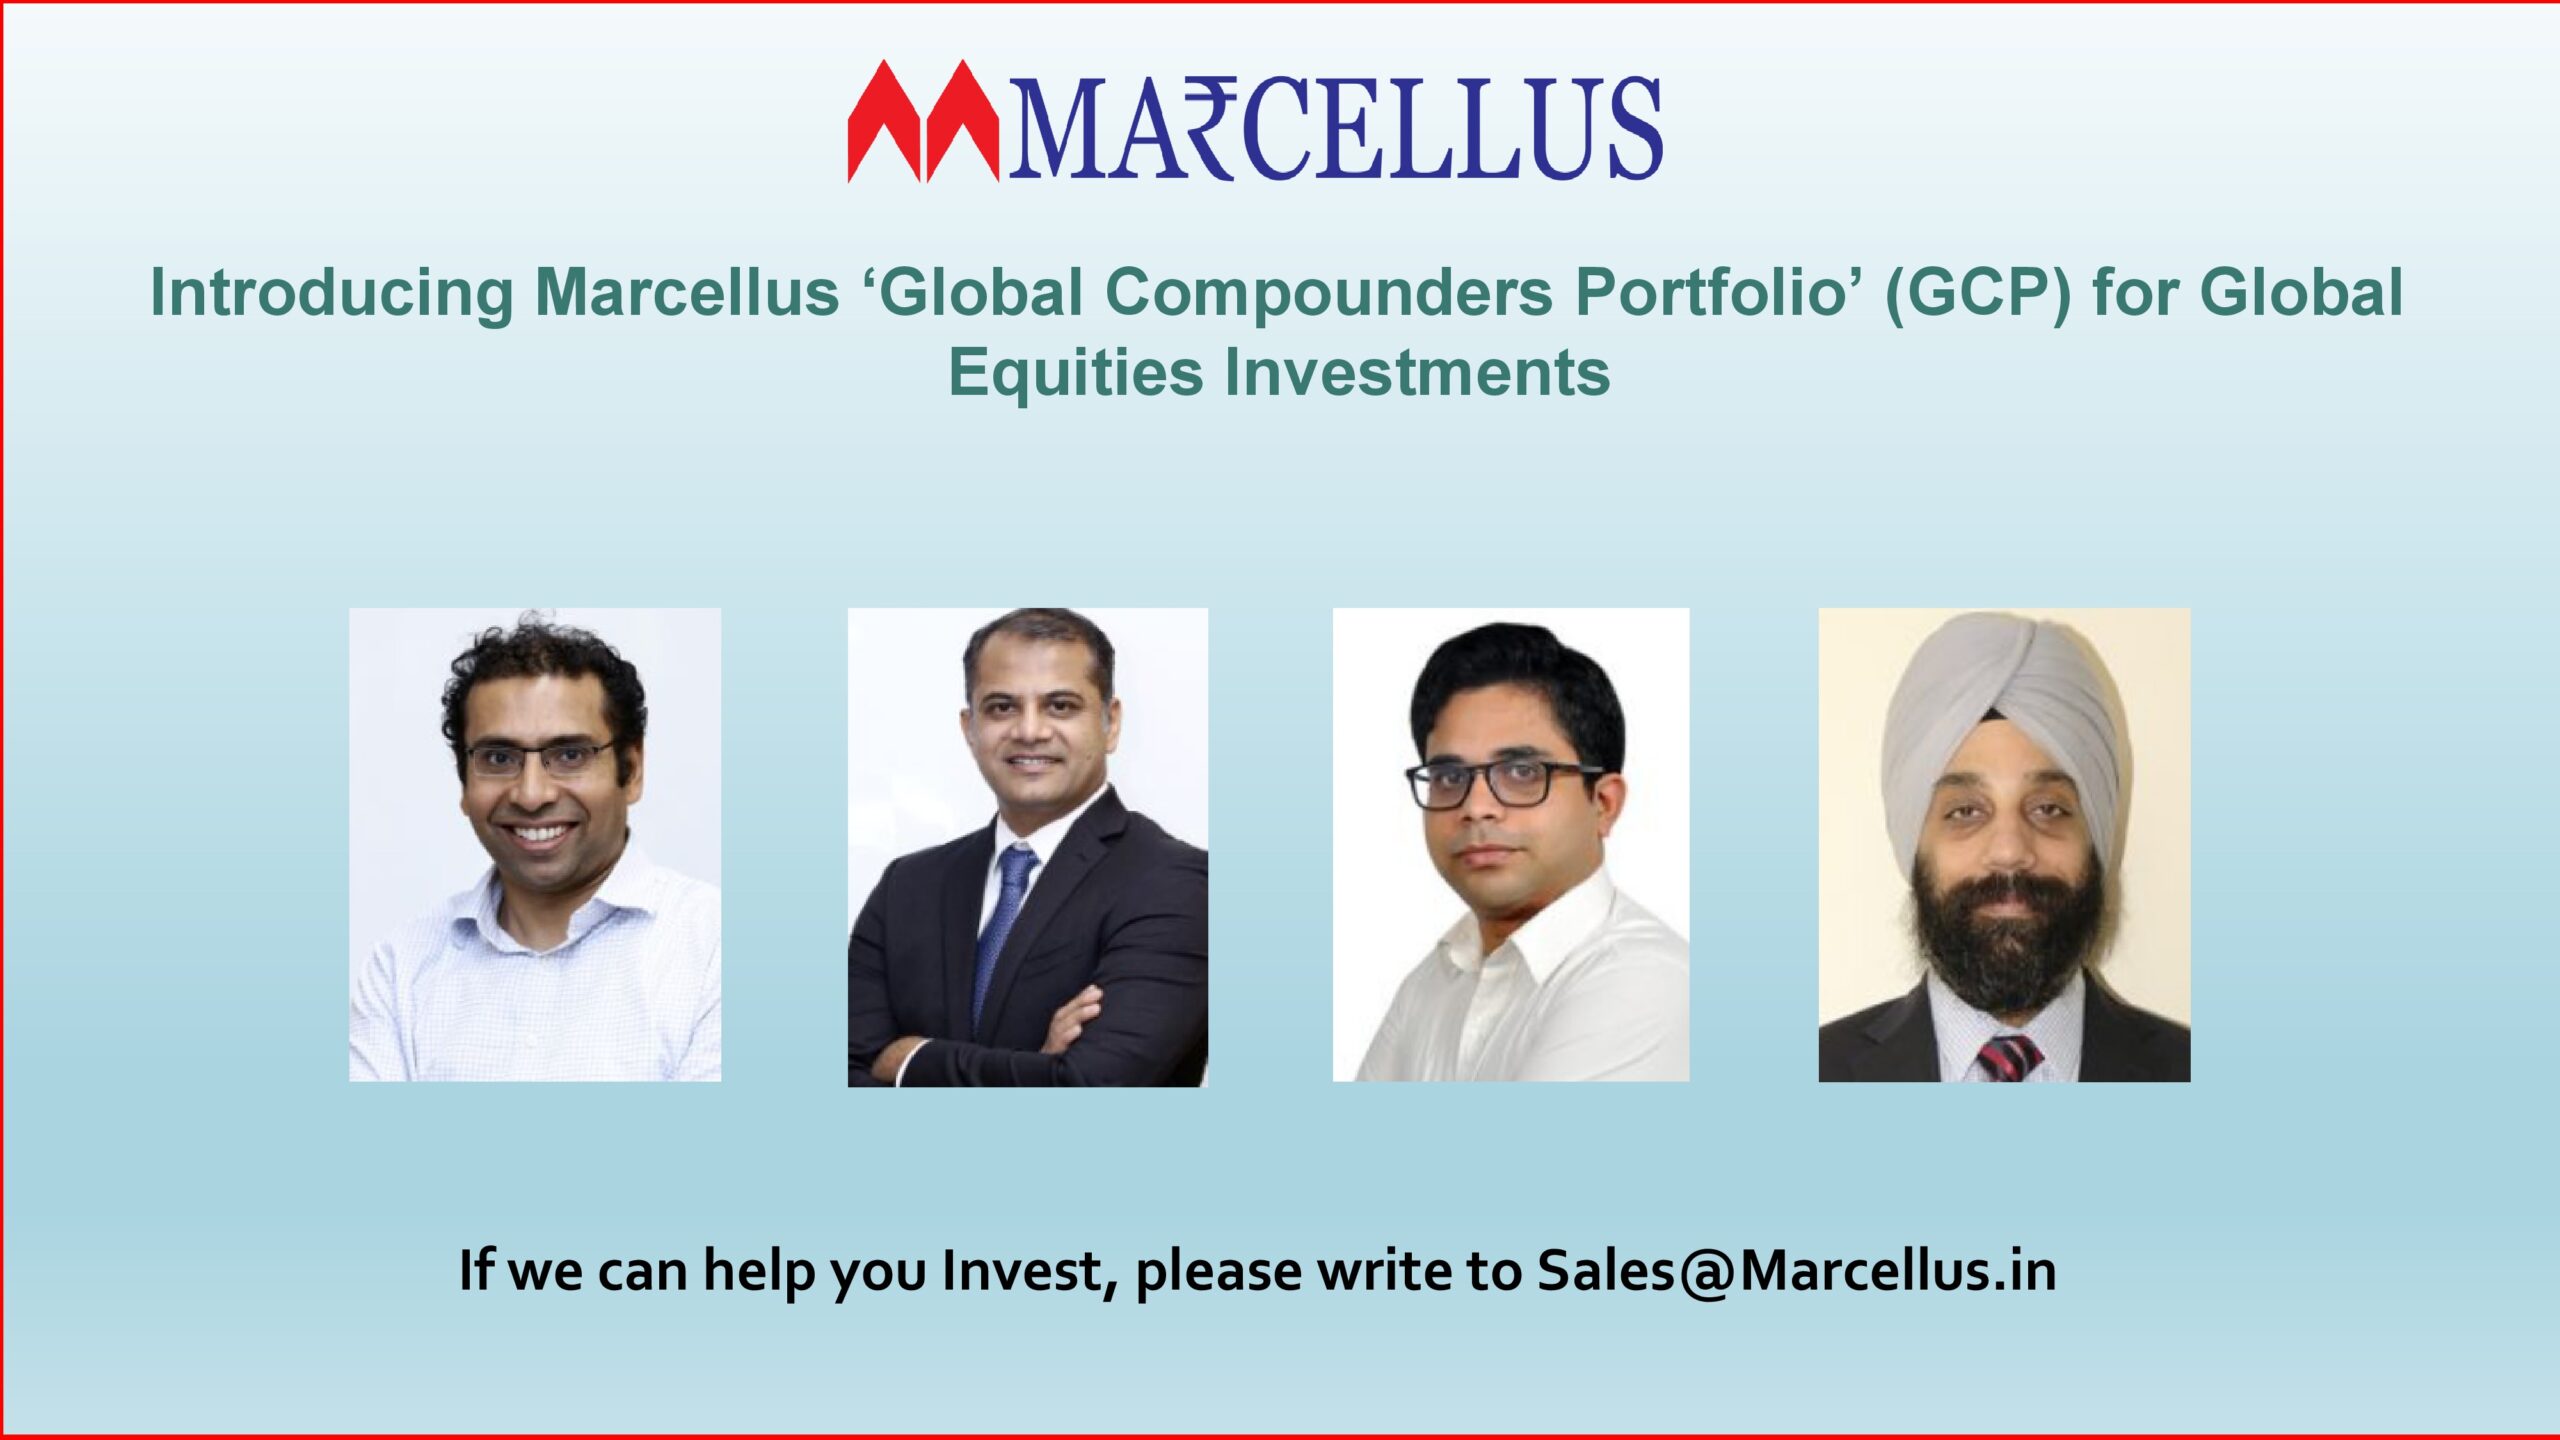 Introducing Marcellus Global Compounders Portfolio (GCP) for Global Equities Investments that offers portfolio management services